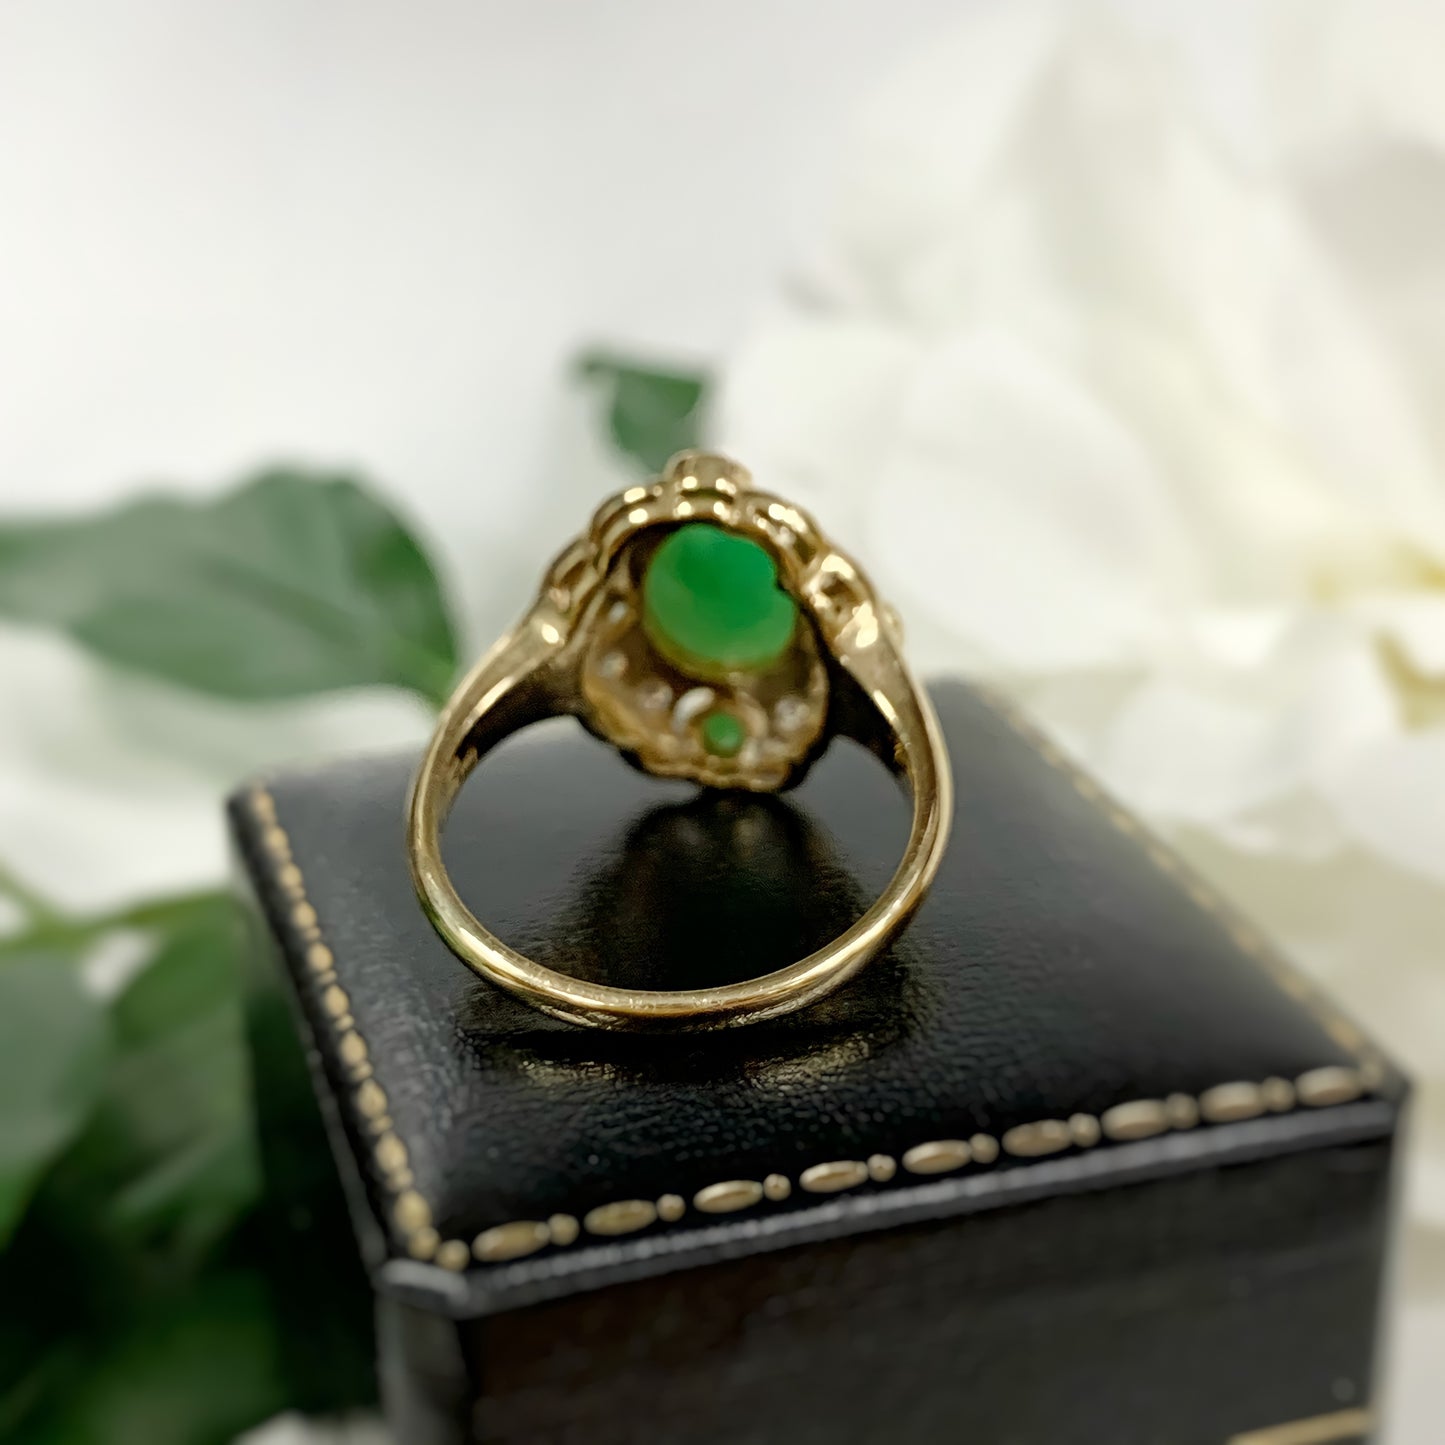 9ct Yellow Gold Art Deco Reproduction Jade and Diamond Ring – SIZE N1/2